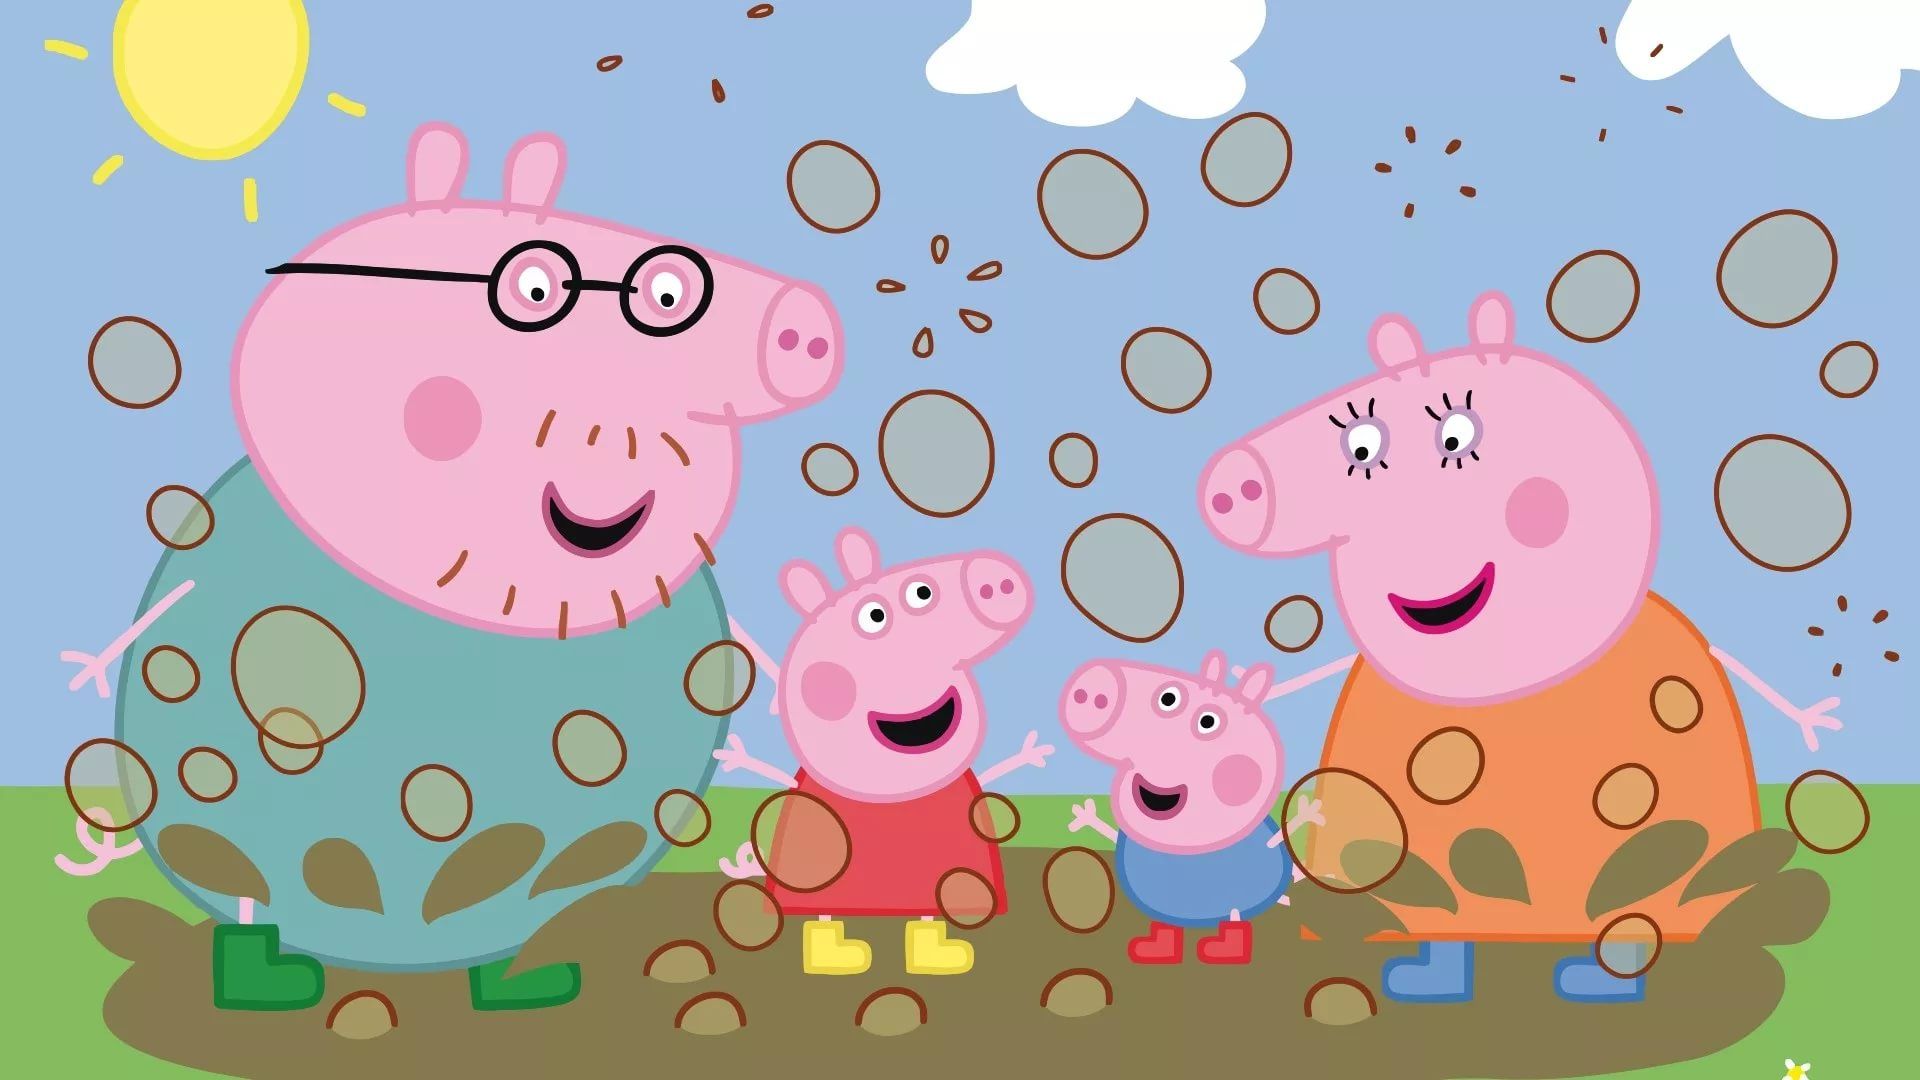 Peppa Pig wallpaper picture hd